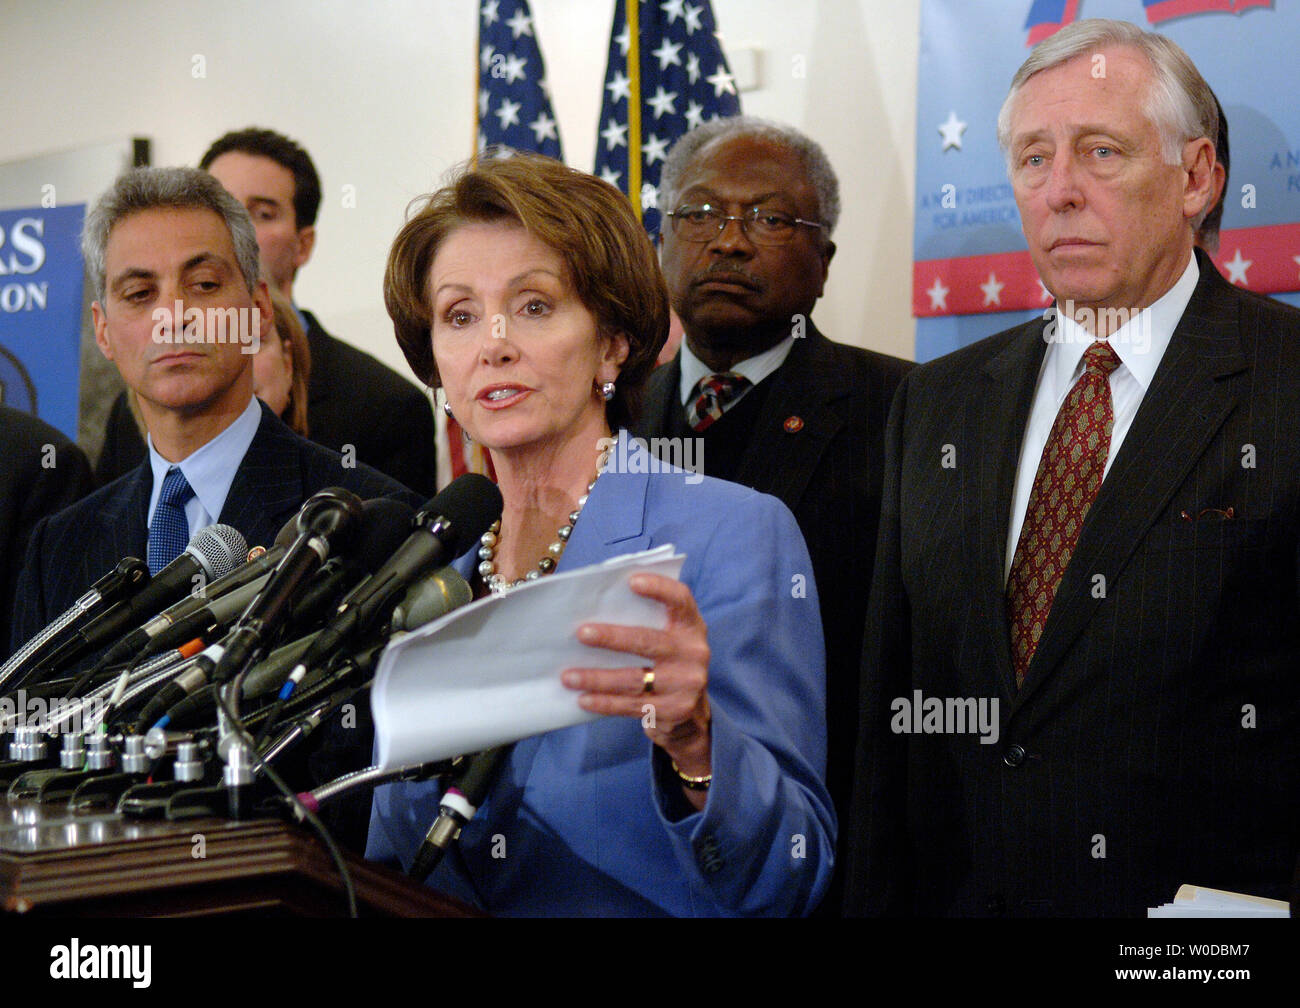 Speaker of the House Nancy Pelosi (D-CA) (C) speaks along side House Majority Leader Steny Hoyer (D-MD) (R), Rep. Rahm Emanuel (D-IL) (L) and Rep. James Clyburn (D-SC)  at a press conference marking the first 100 legislative hours of the new Congress, in Washington on January 18, 2007. (UPI Photo/Kevin Dietsch) Stock Photo